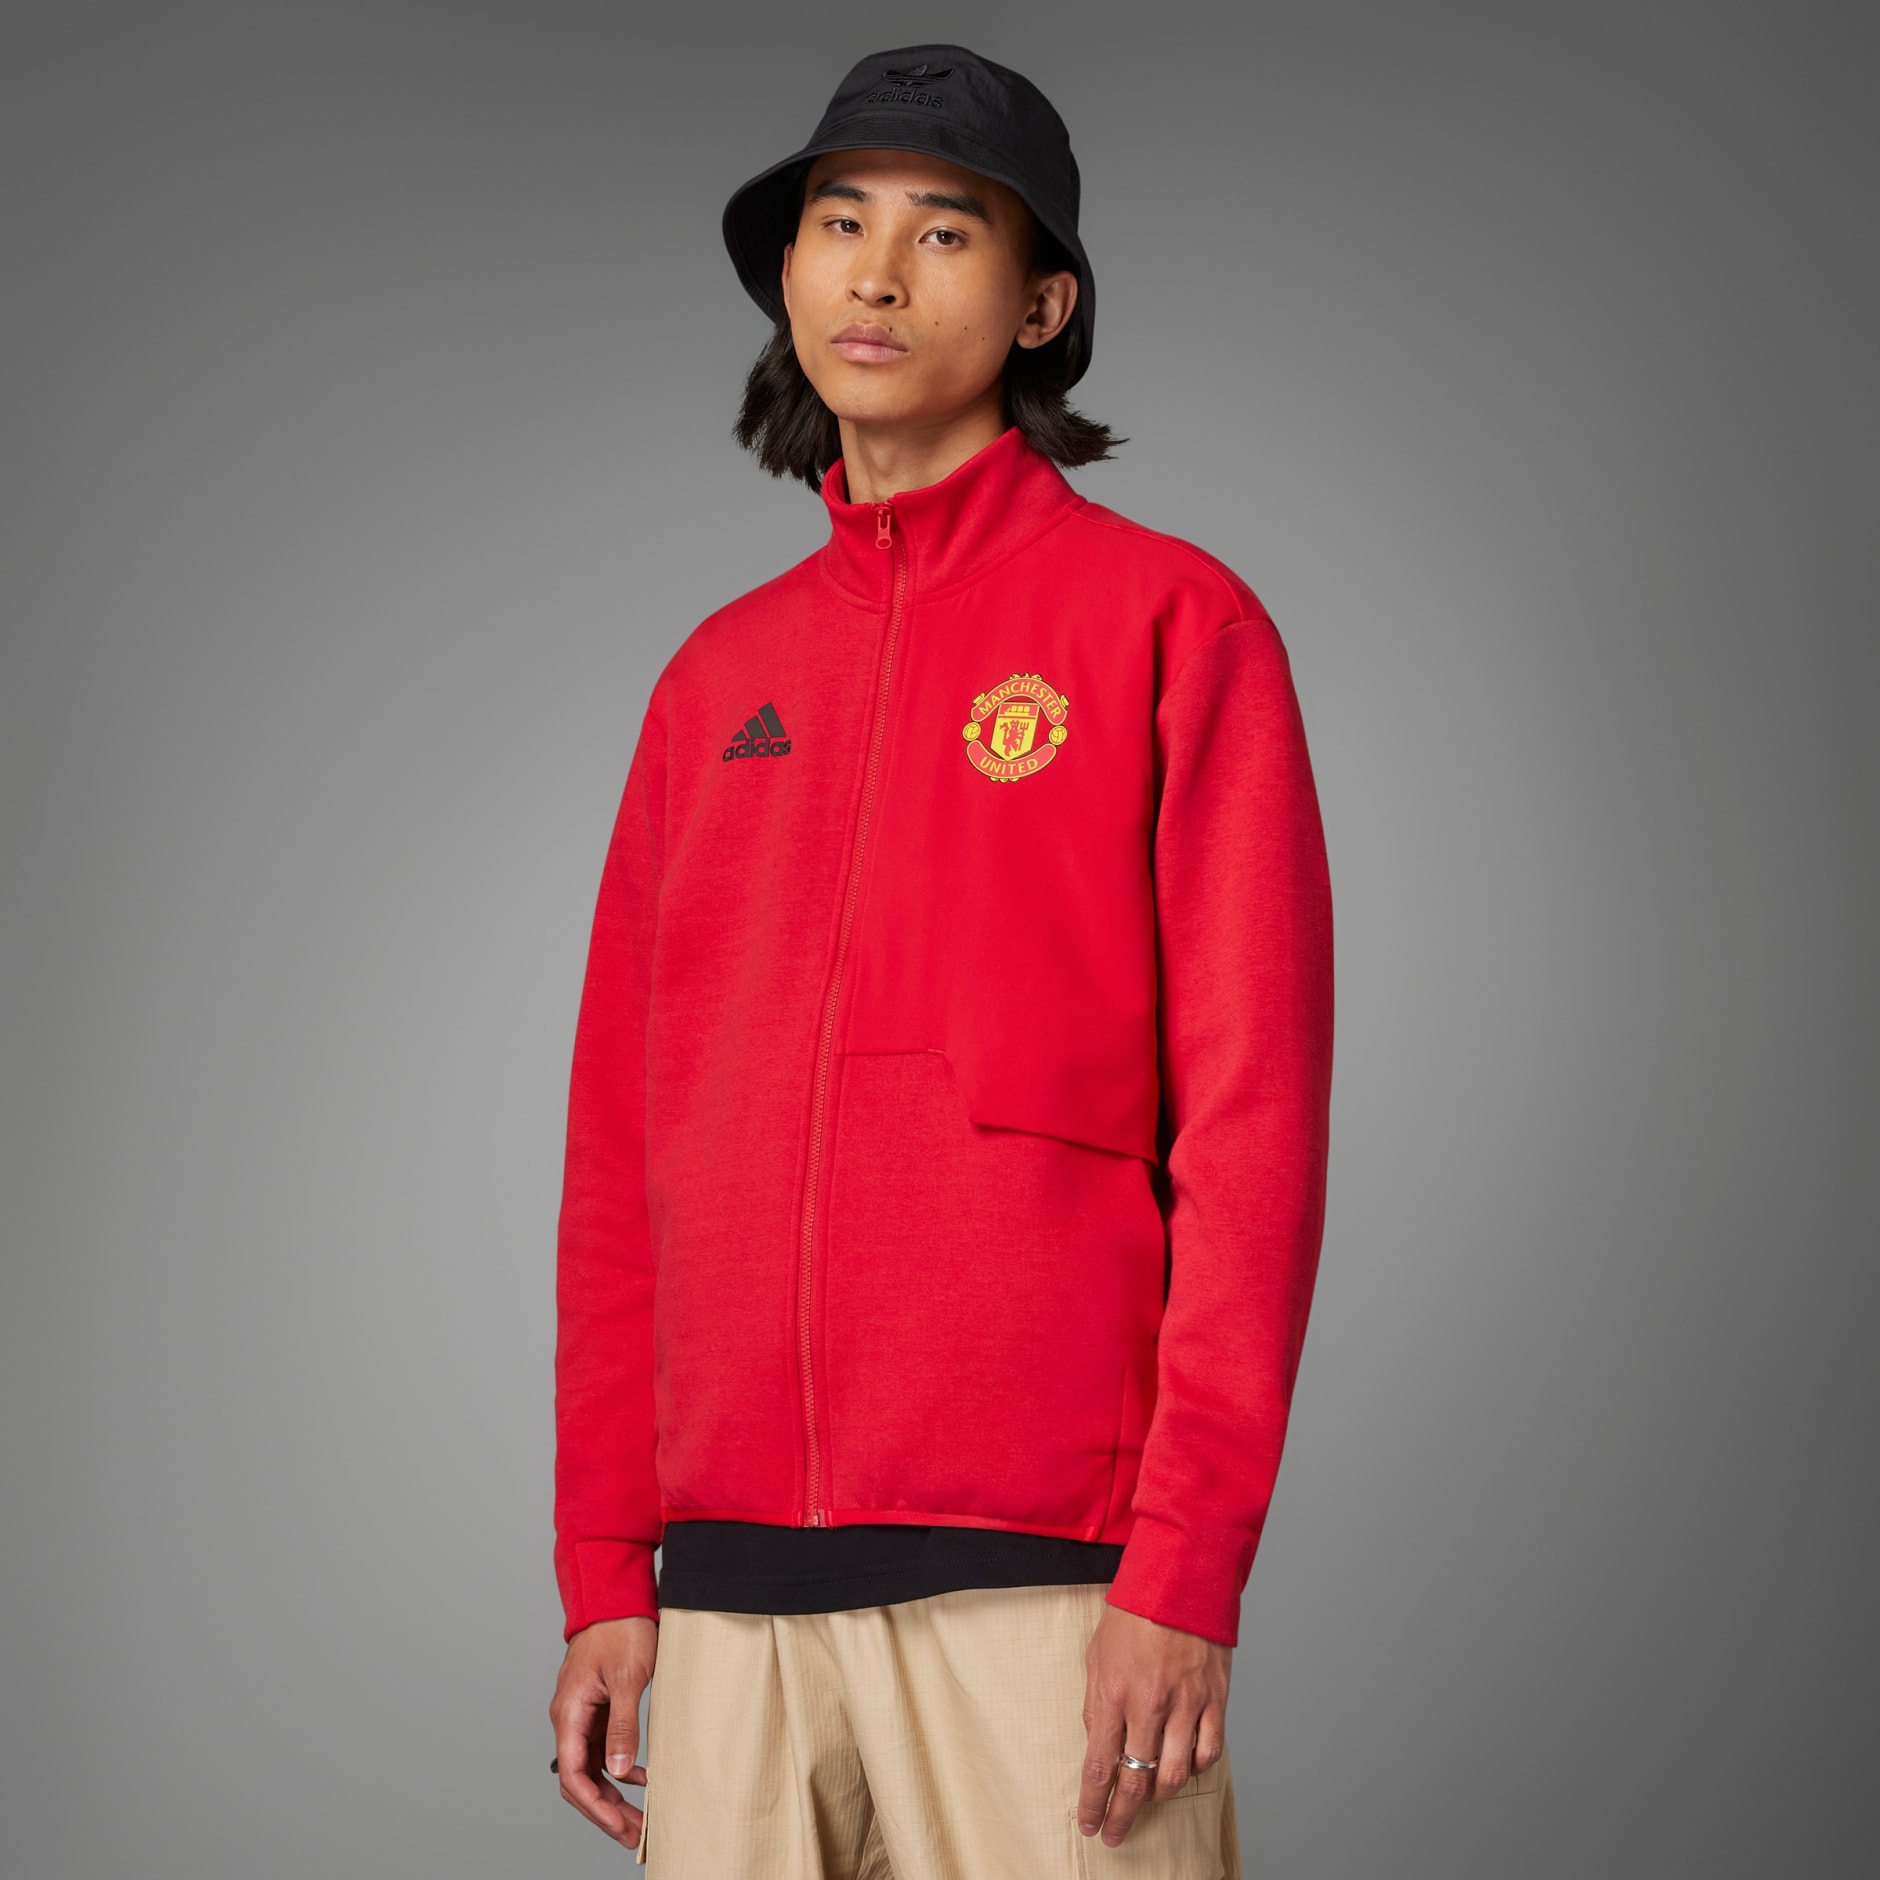 Clothing - Manchester United Anthem Jacket - Red | adidas South Africa